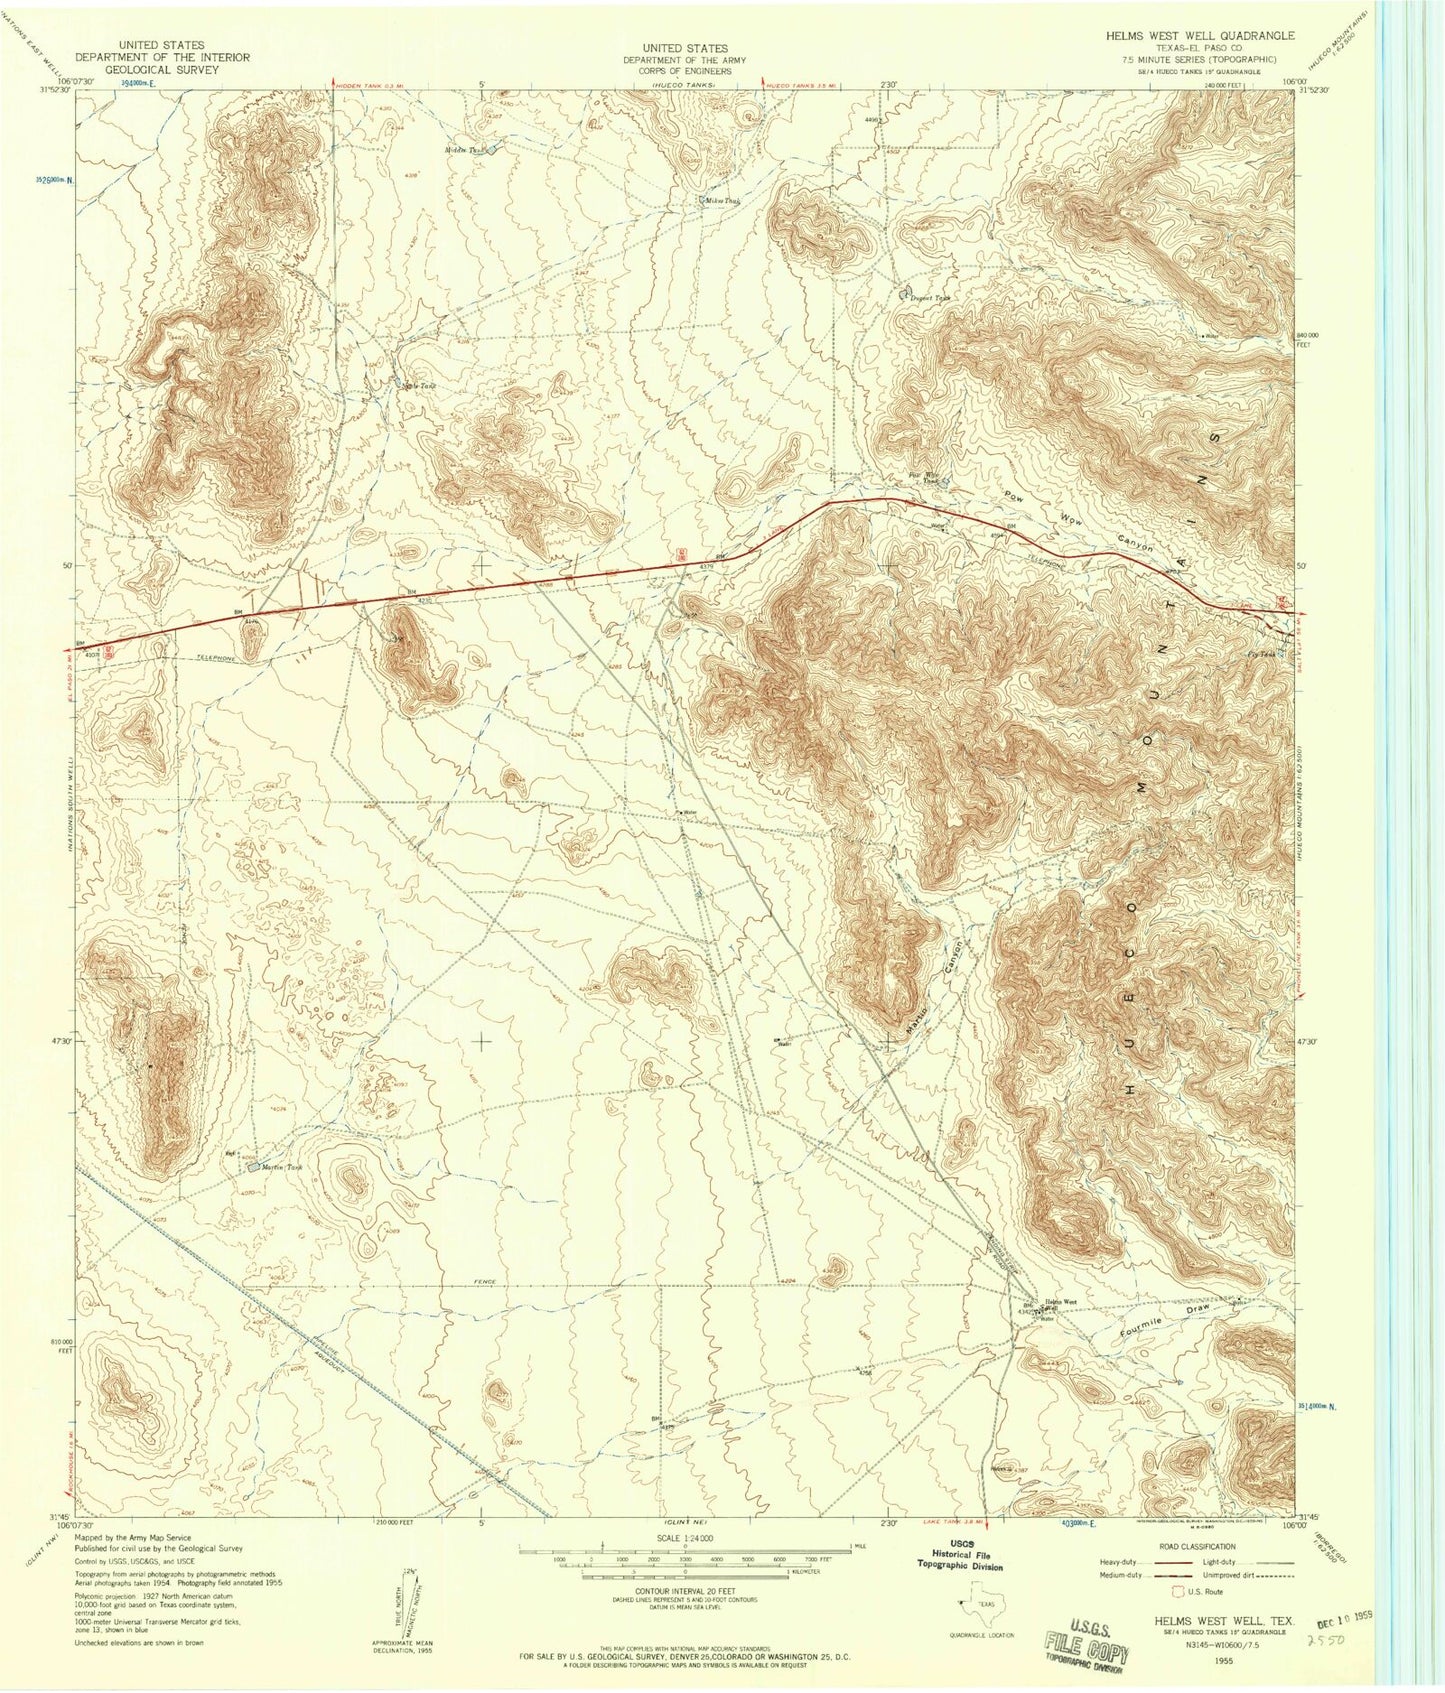 Classic USGS Helms West Well Texas 7.5'x7.5' Topo Map Image